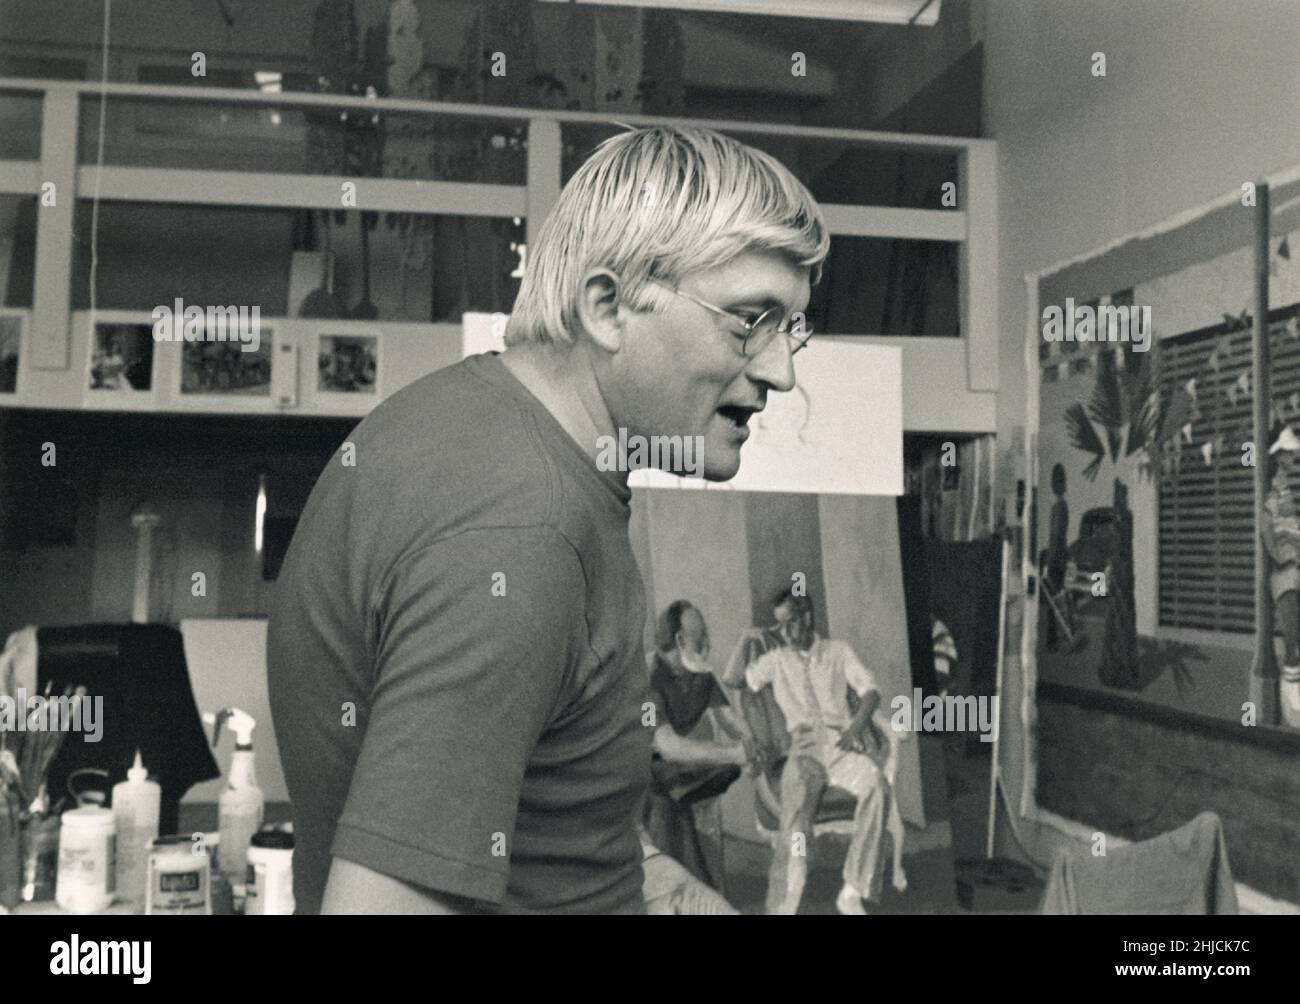 David Hockney in his Pico Boulevard studio in Los Angeles, 1979. Hockney was a major contributor to the British Pop art movement of the 1960's, and lives today in Los Angeles, California. Stock Photo